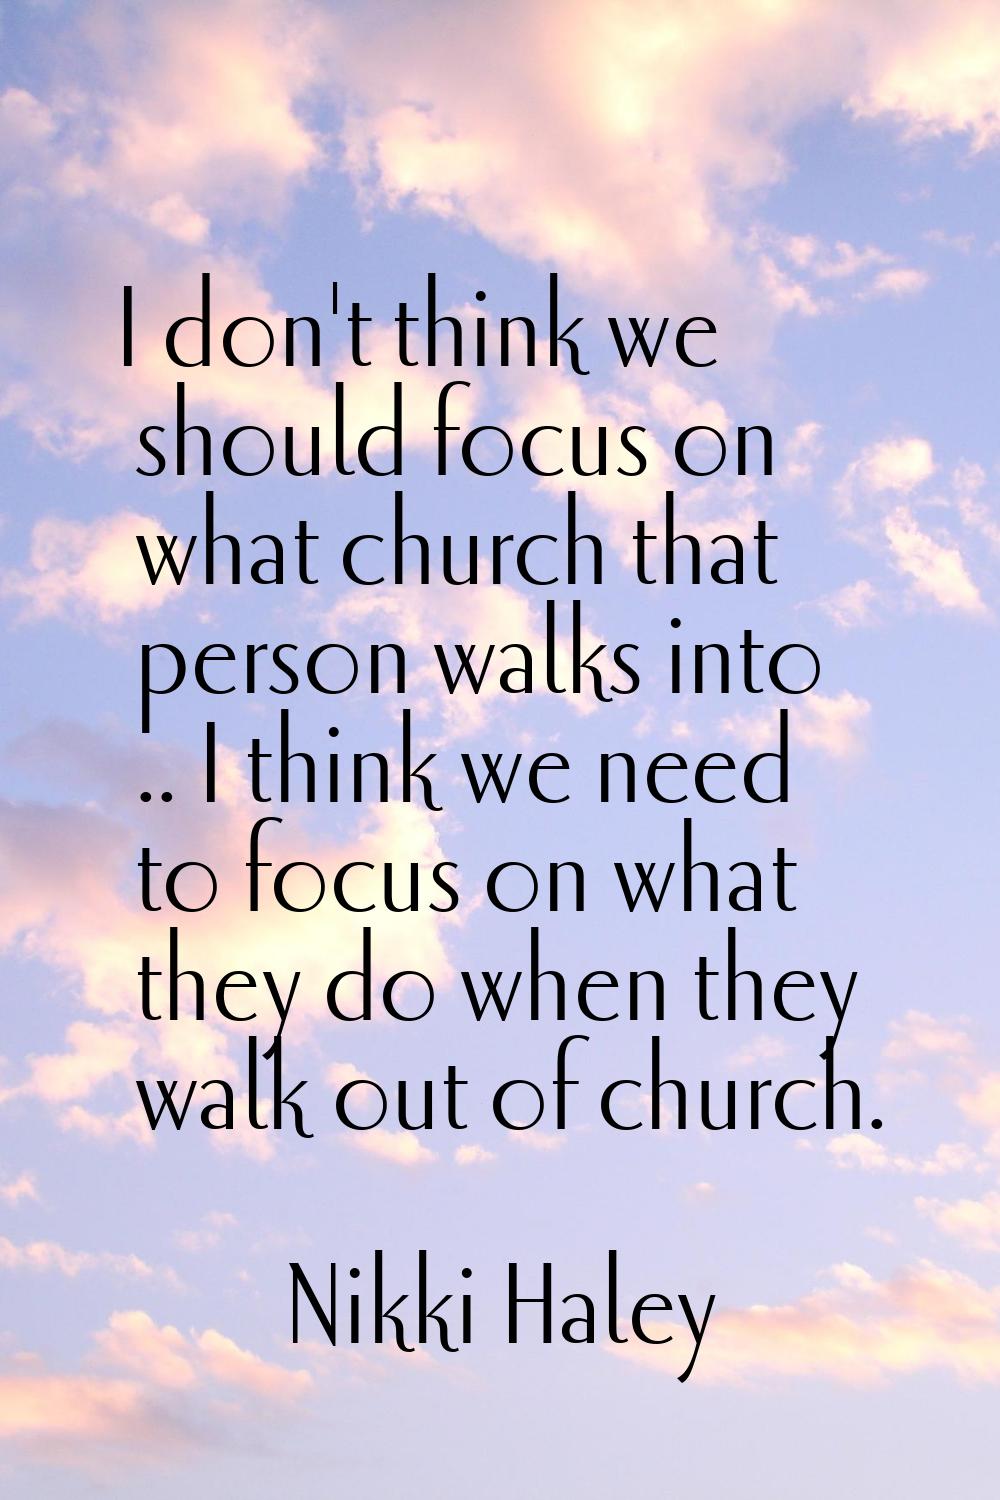 I don't think we should focus on what church that person walks into .. I think we need to focus on 